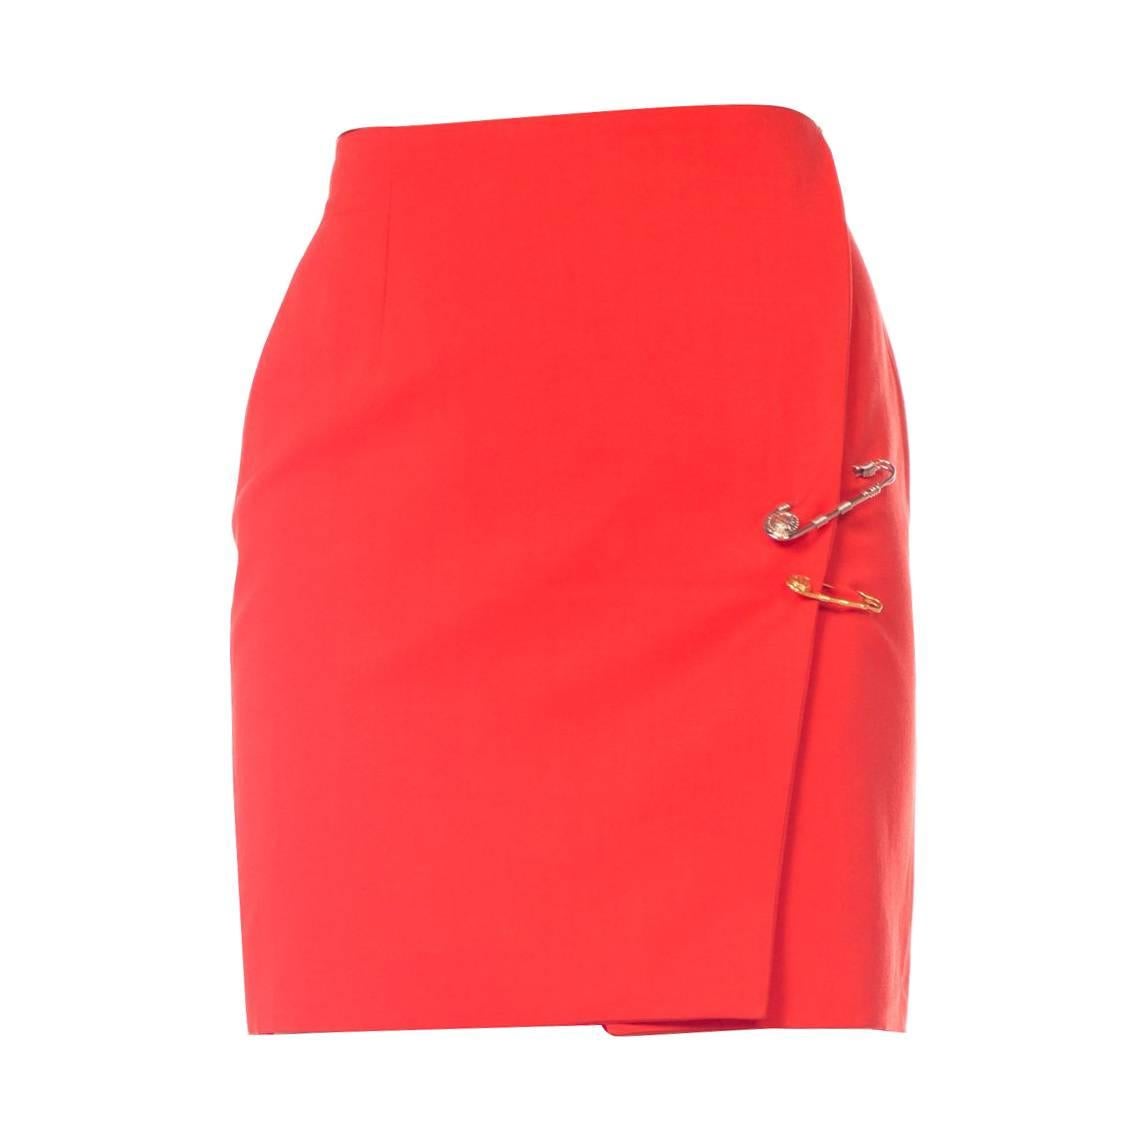 Gianni Versace 1990s Punk Collection Orange Safety Pin Skirt